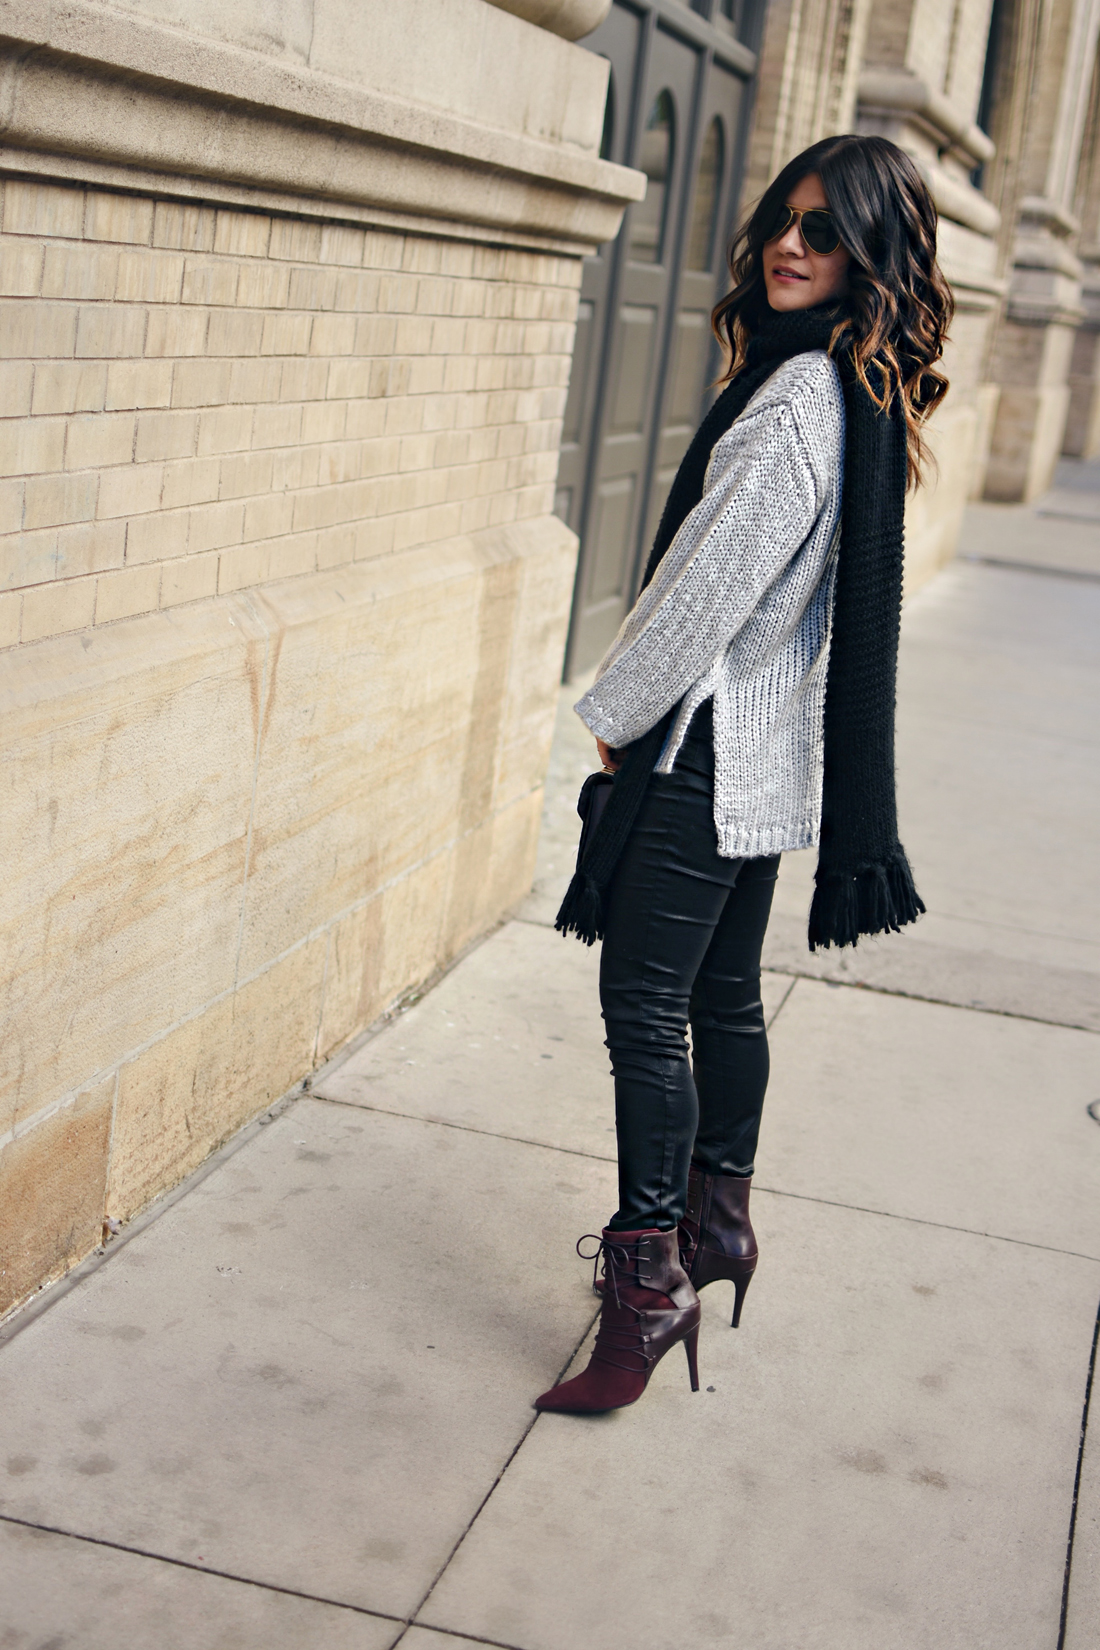 Carolina Hellal of Chic Talk wearing a Chicwish grey knit sweater, Rayban aviator sunglasses, Madewell coated skinny jeans and Nine West burgundy booties